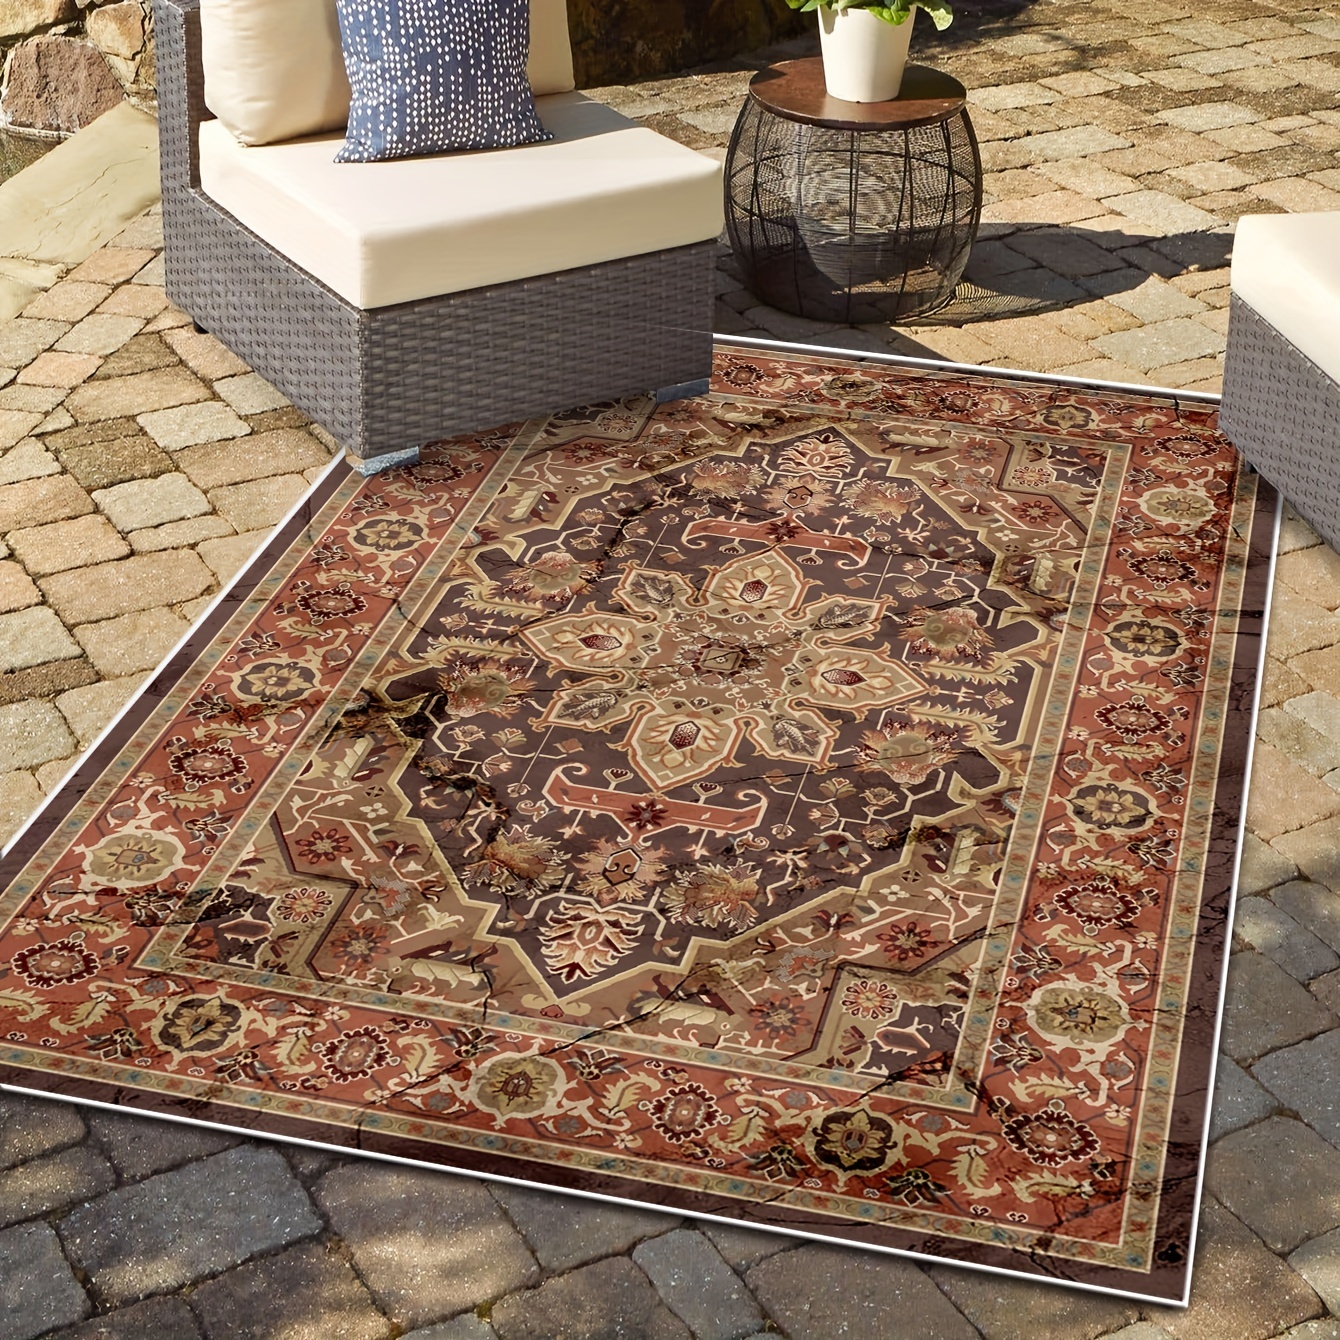 Easy Clean Floor Carpets for Entryway -Non Slip Outdoor Rugs With